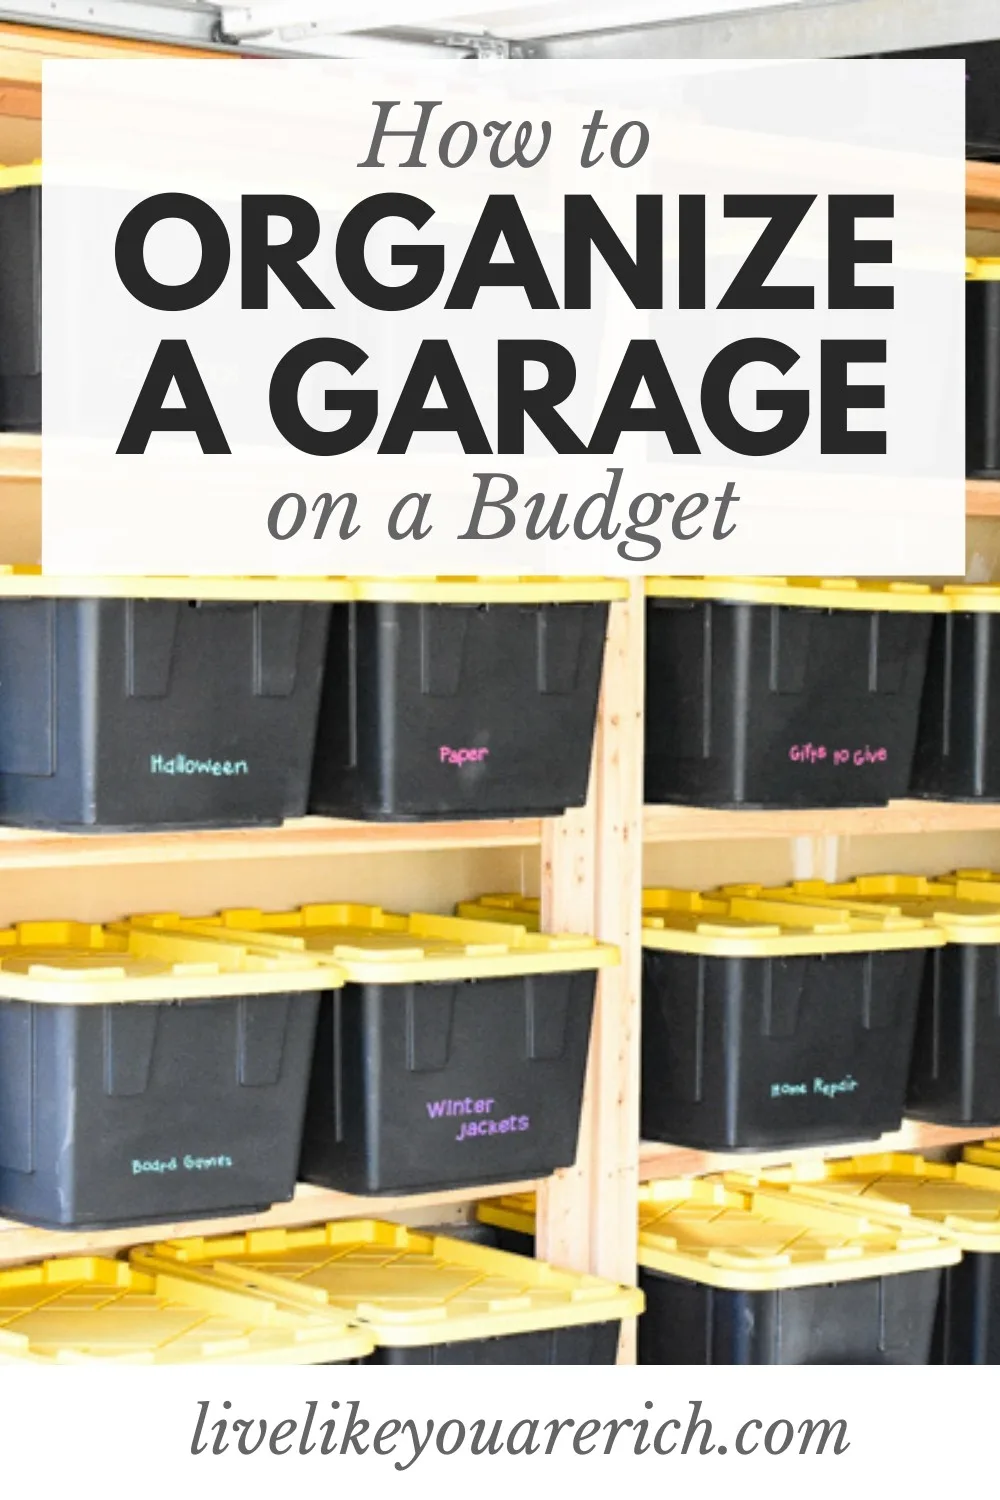 I’ve done my best to keep my garage organized, but with very little storage, it has been difficult. After some research, I decided to build wood storage shelves and the result has been astounding. My garage now is cluttered free. I’m sharing how I organize my garage the best way on a budget.